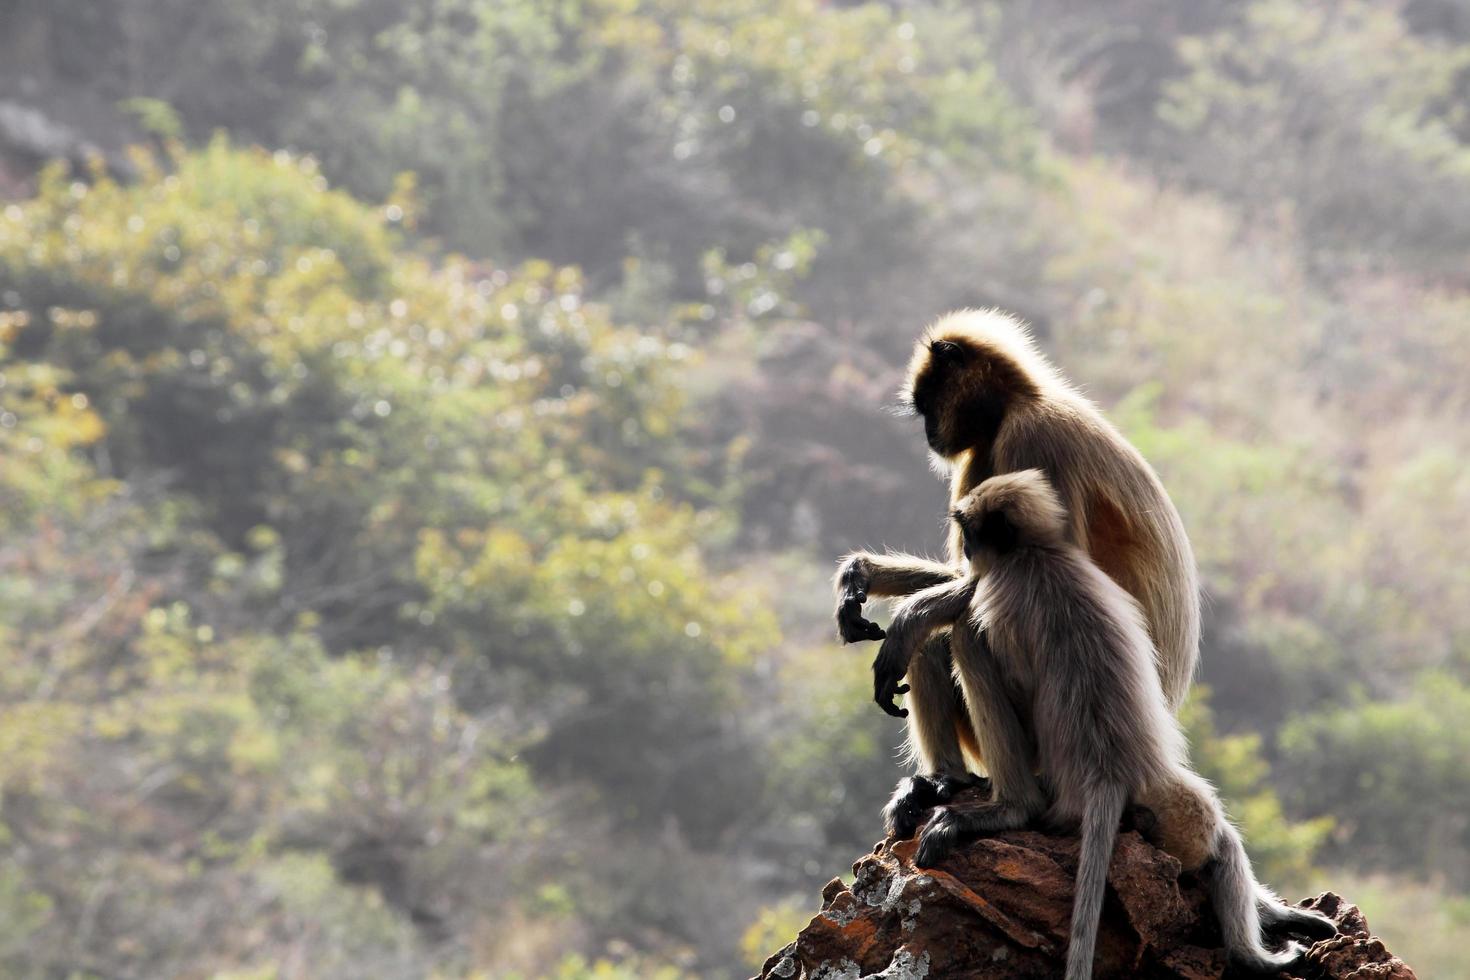 Gray Langur Monkey with a Baby. photo